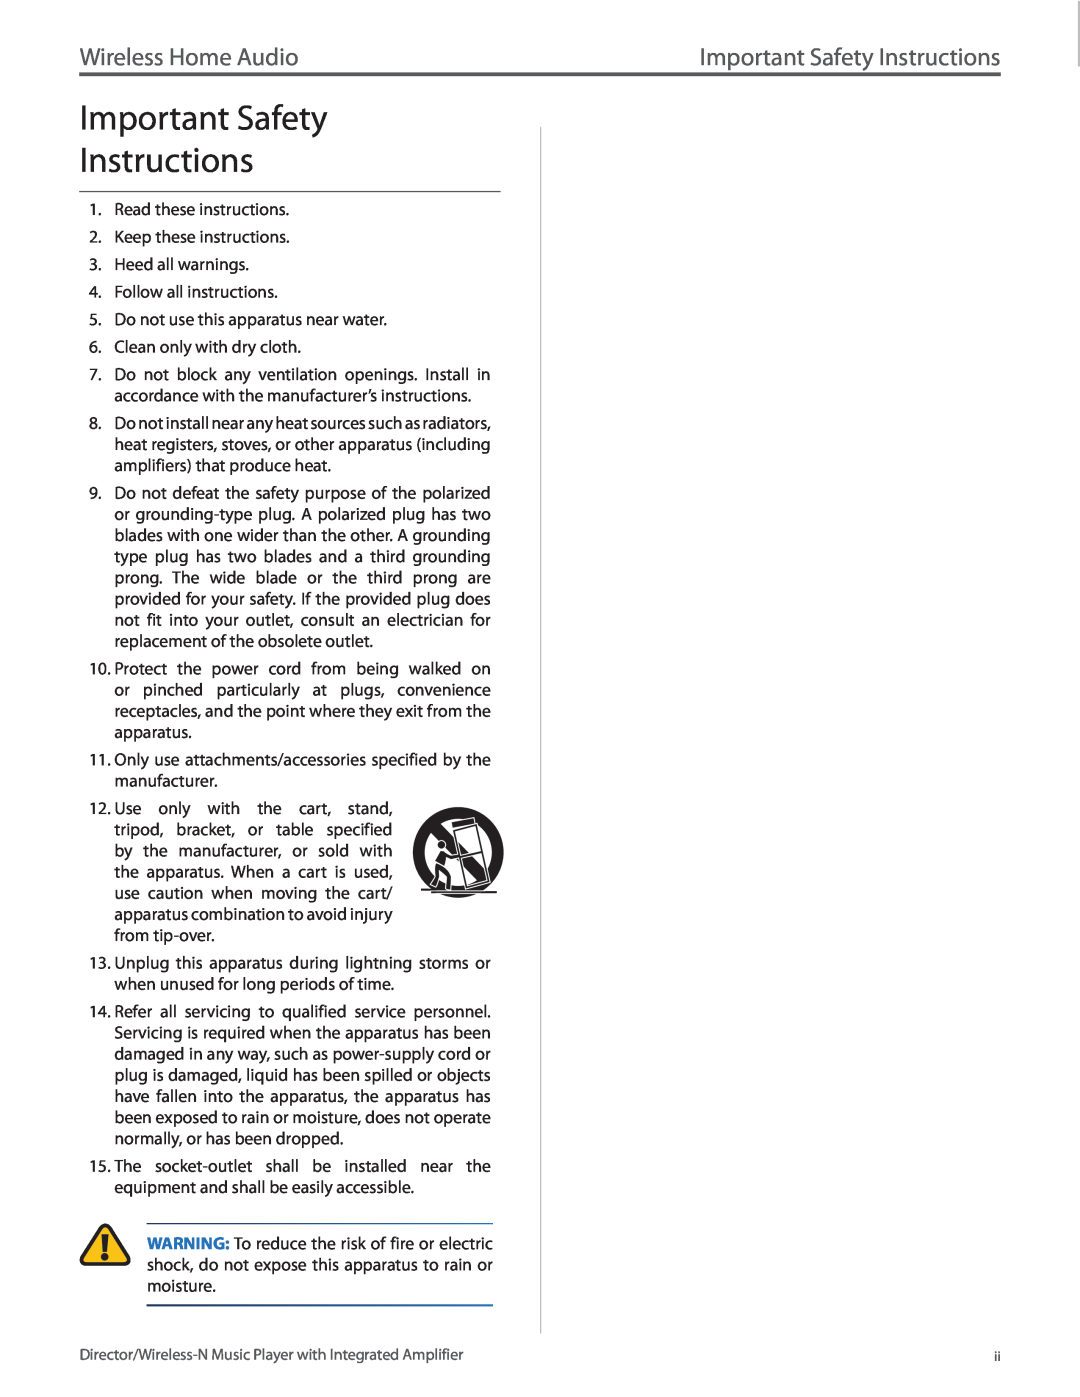 Linksys DMC250 manual Important Safety Instructions, Wireless Home Audio 